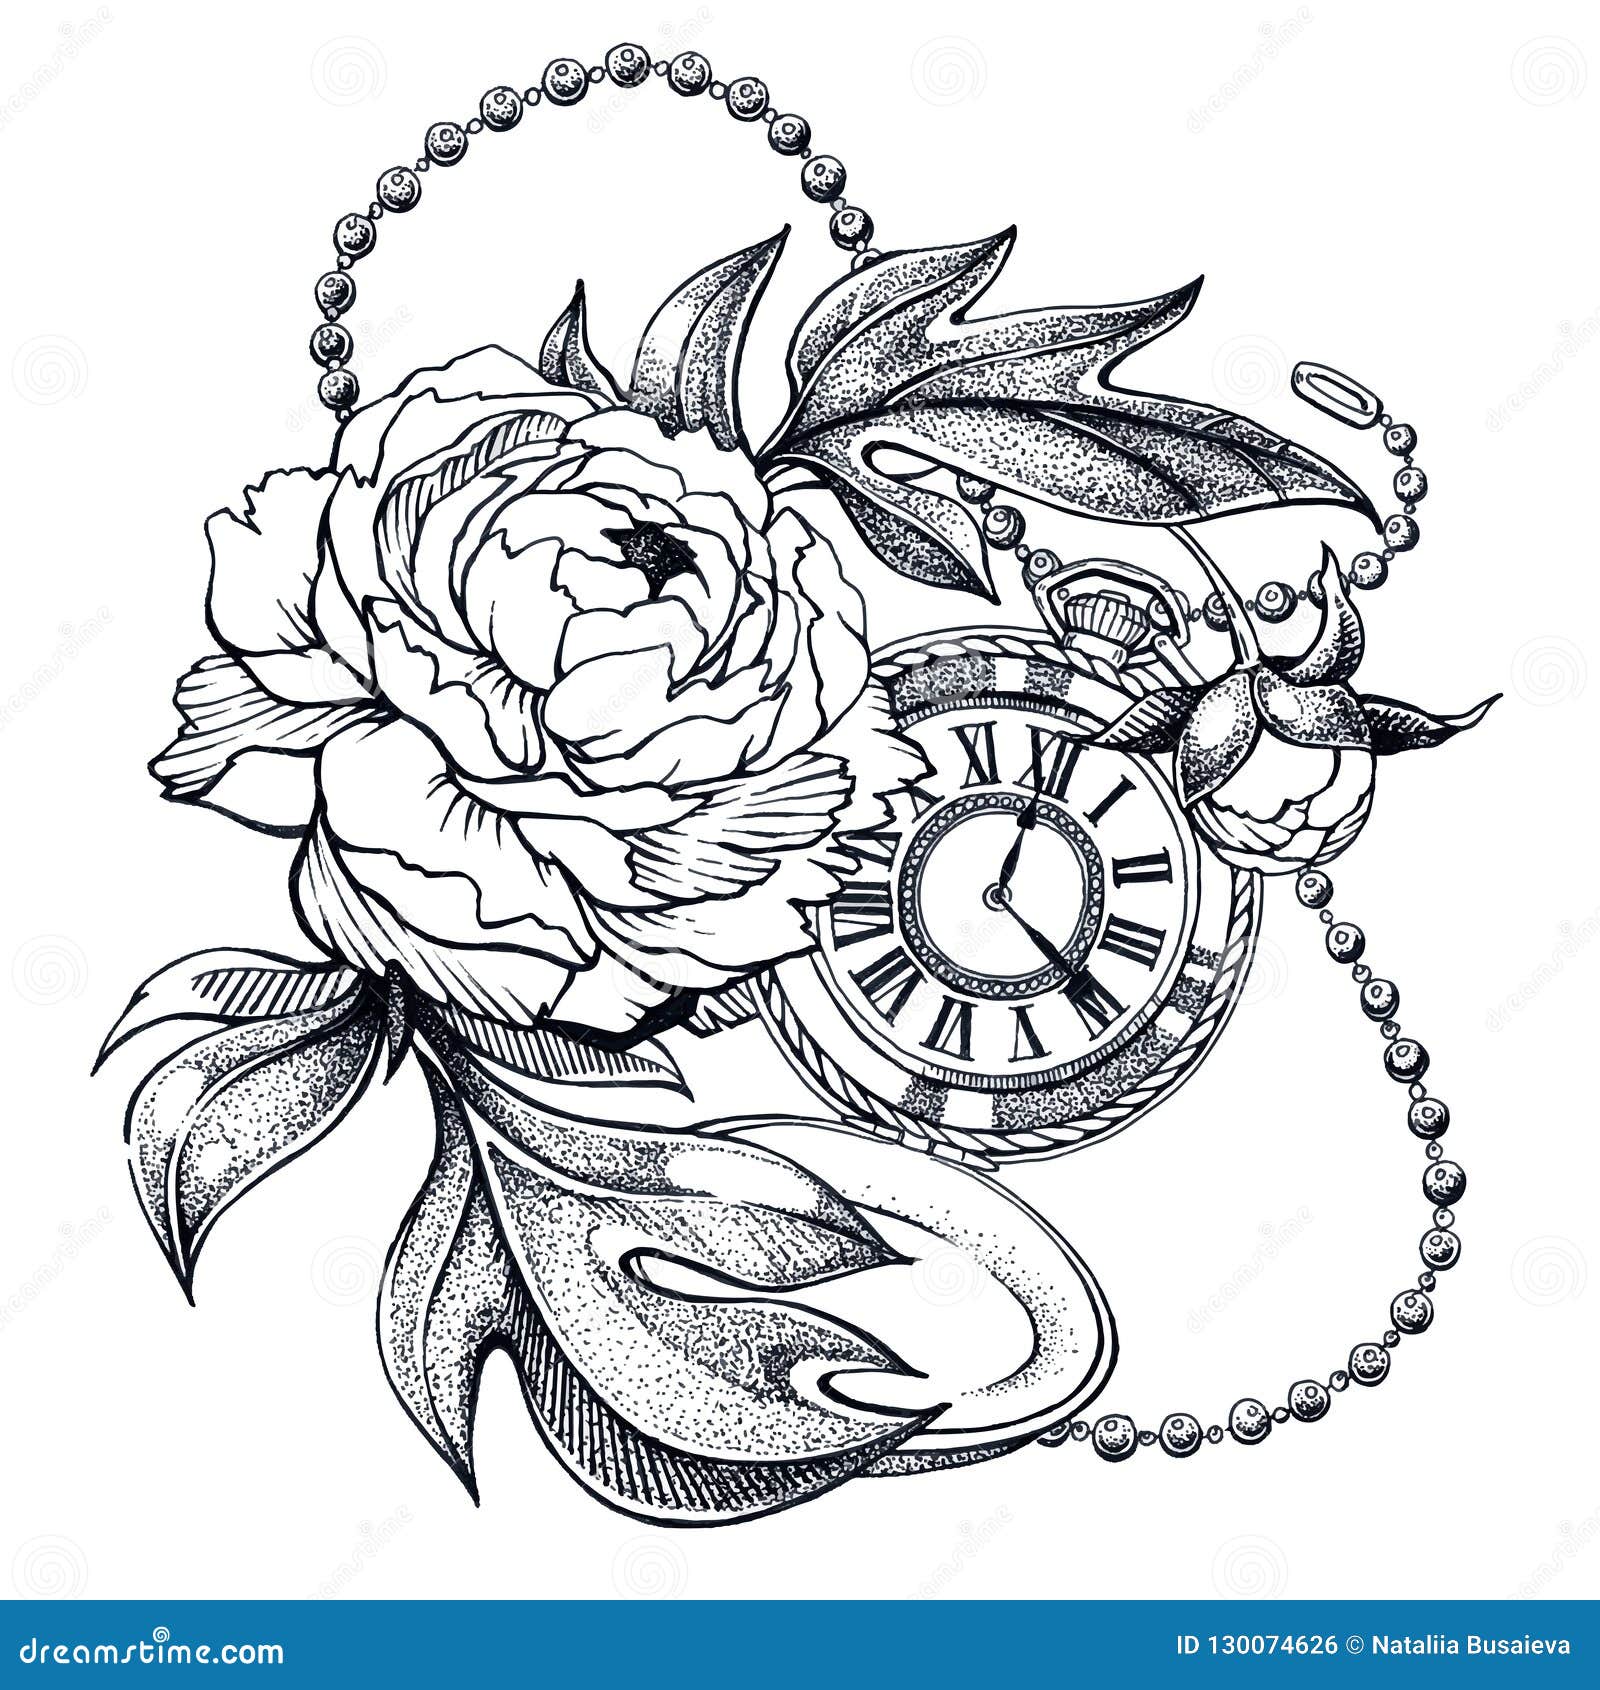 Buy Pocket Watch and Roses Tattoo Designs, Tattoo Flash Sheet, Jpeg, Pocket  Watch Desings, Rose Designs Online in India - Etsy